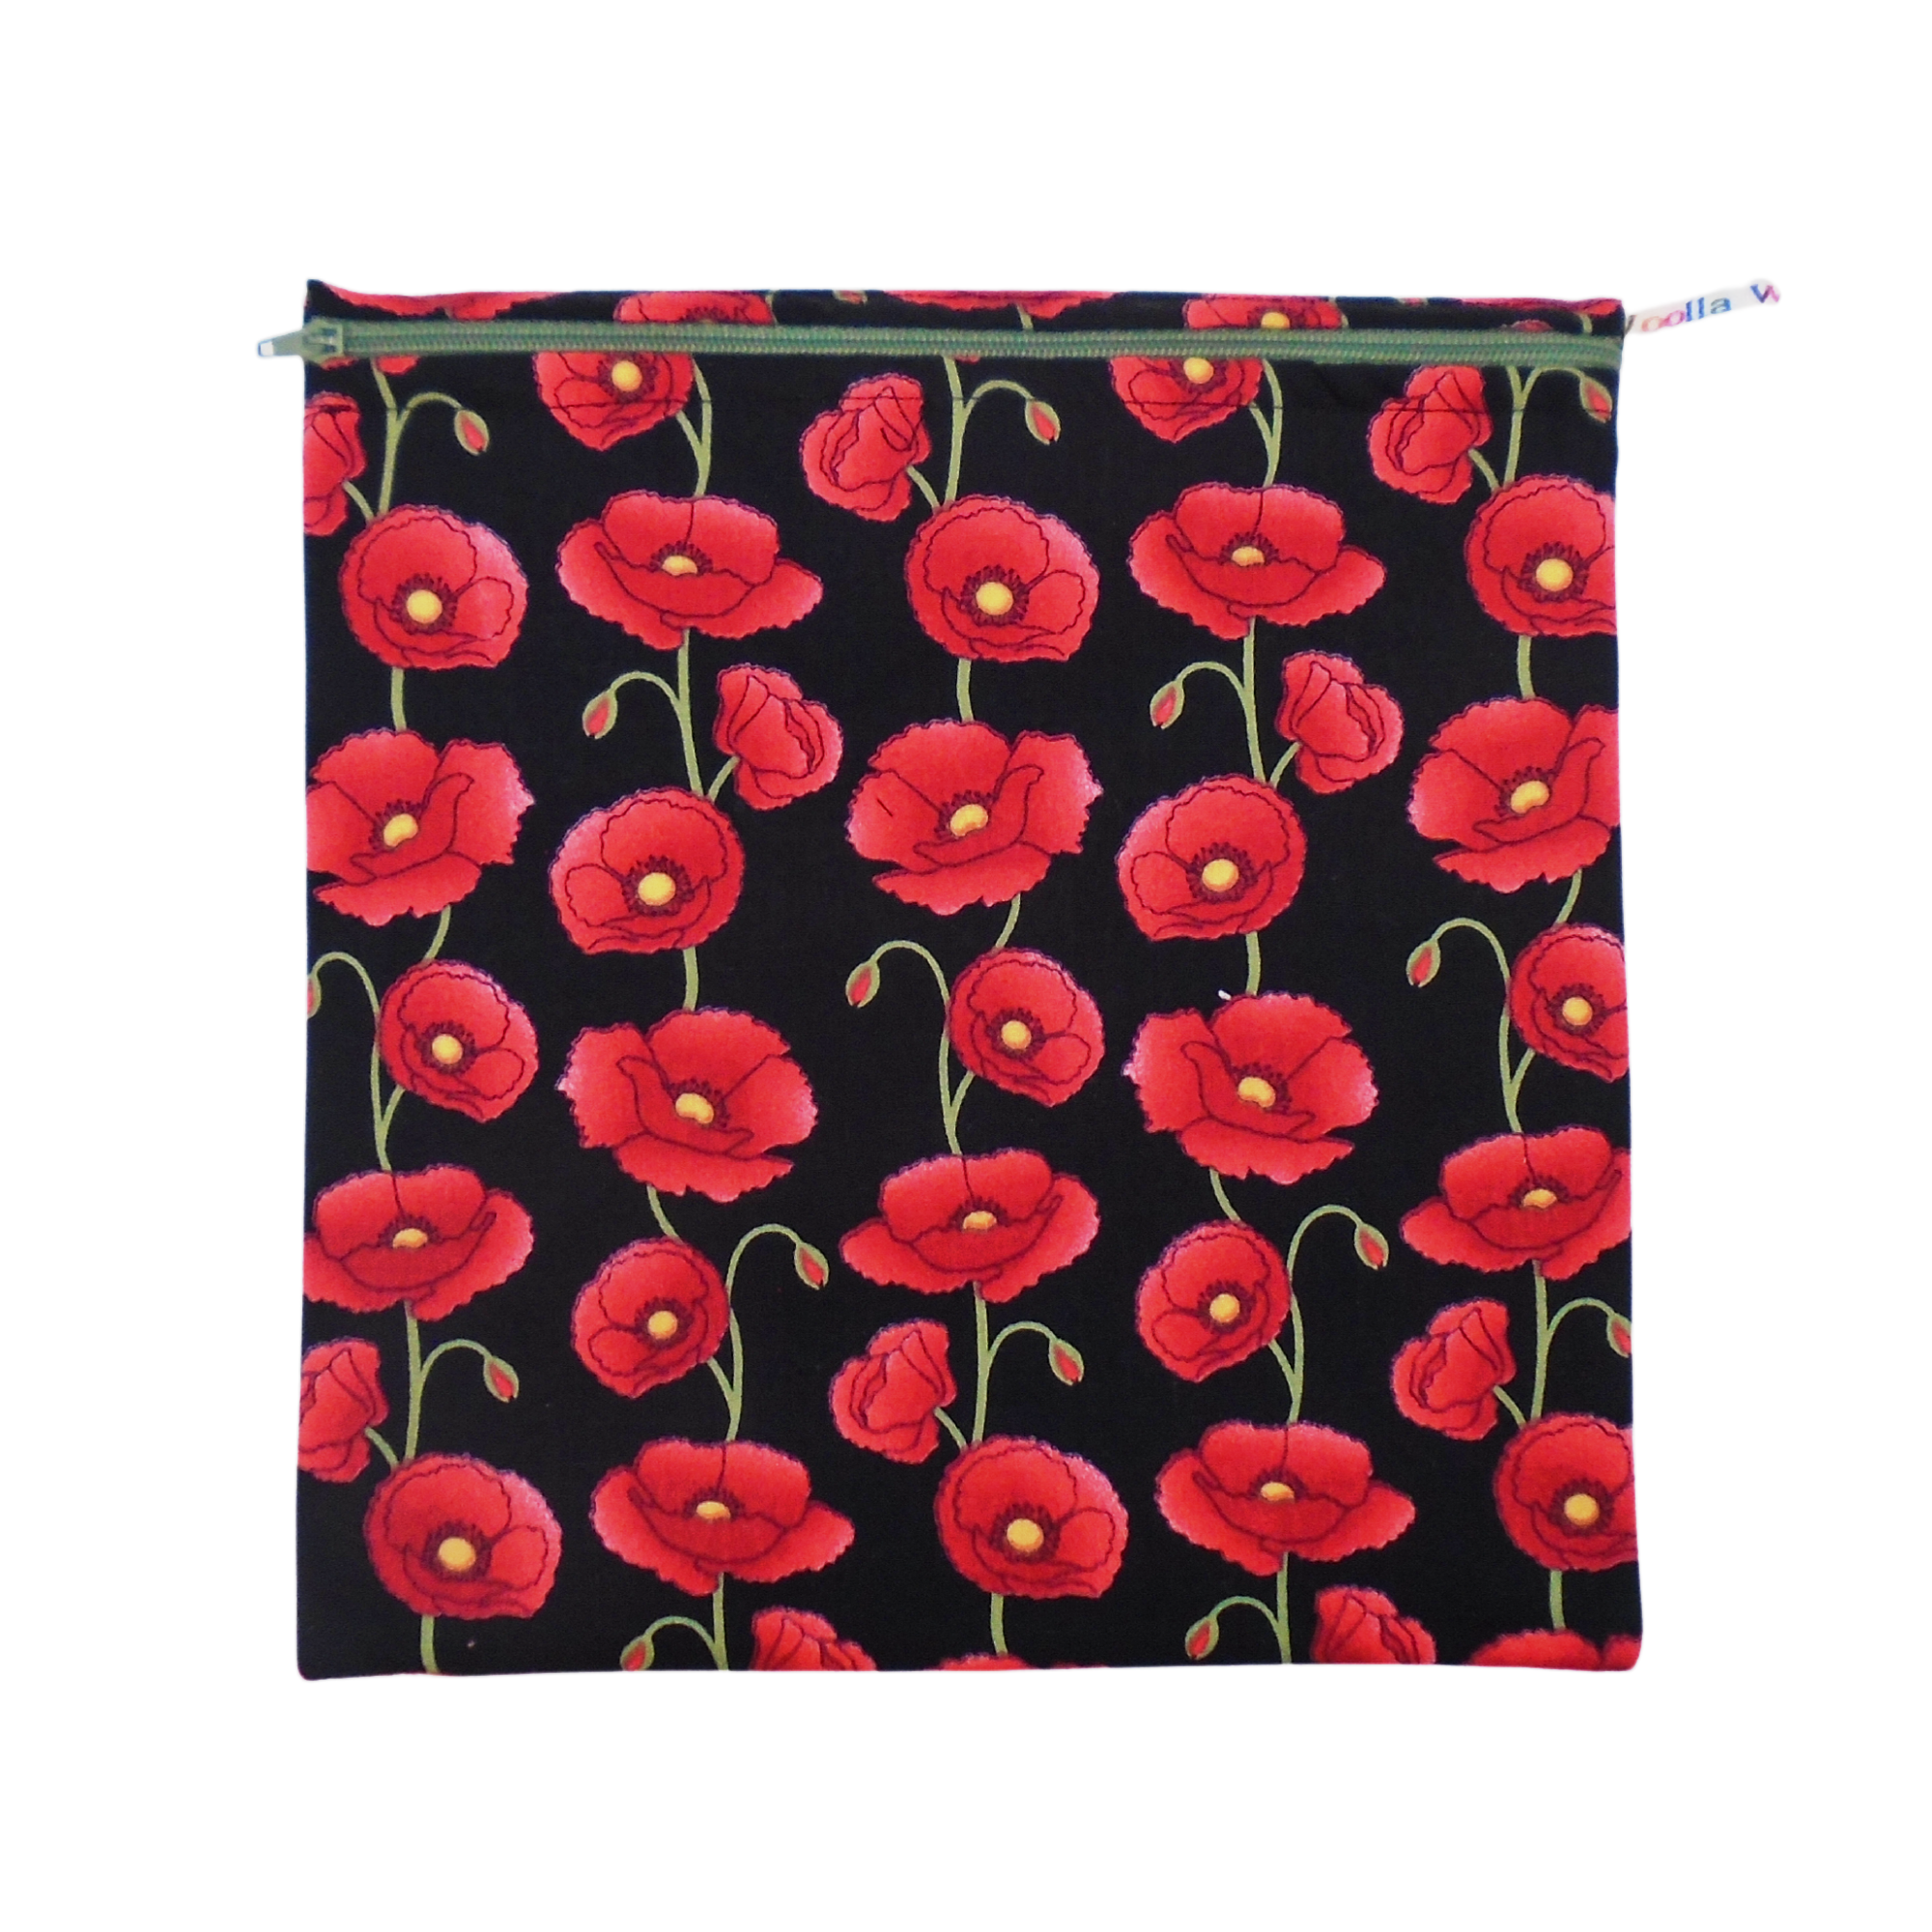 Poppy Stems - Large Poppins Pouch - Waterproof, Washable, Food Safe, Vegan, Lined Zip Bag